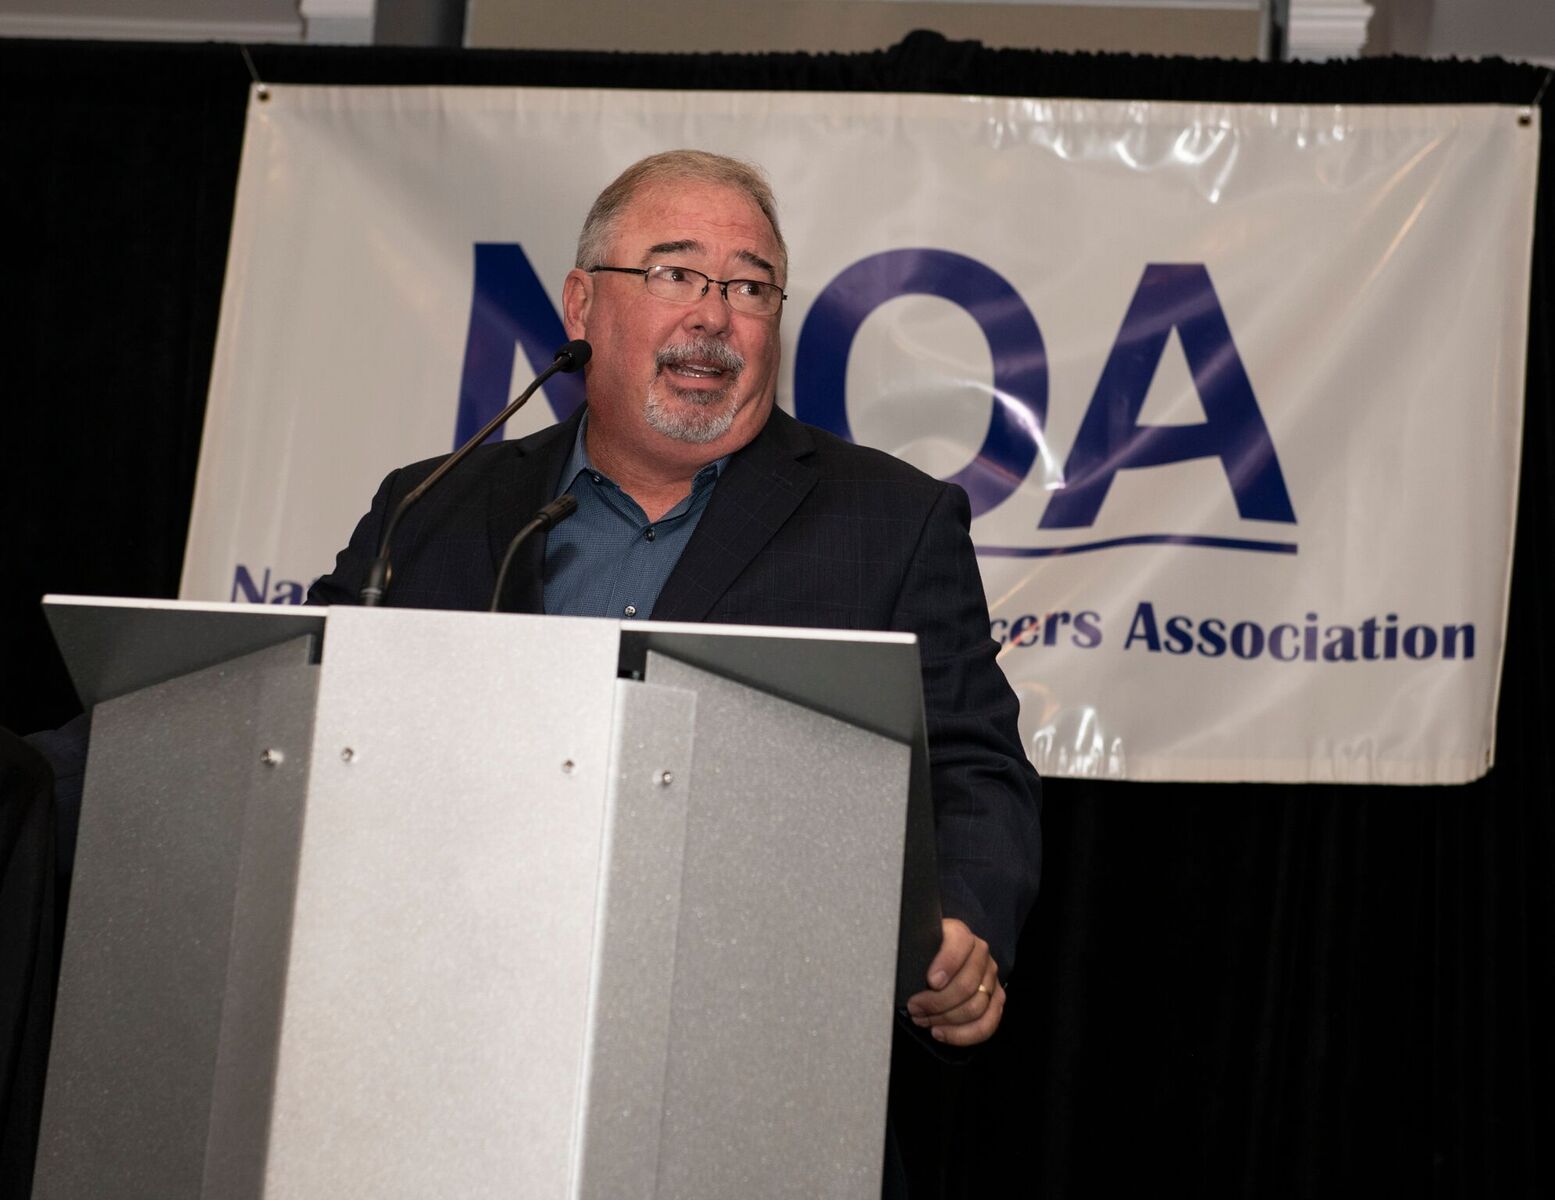 image of Don Aaron speaking at conference